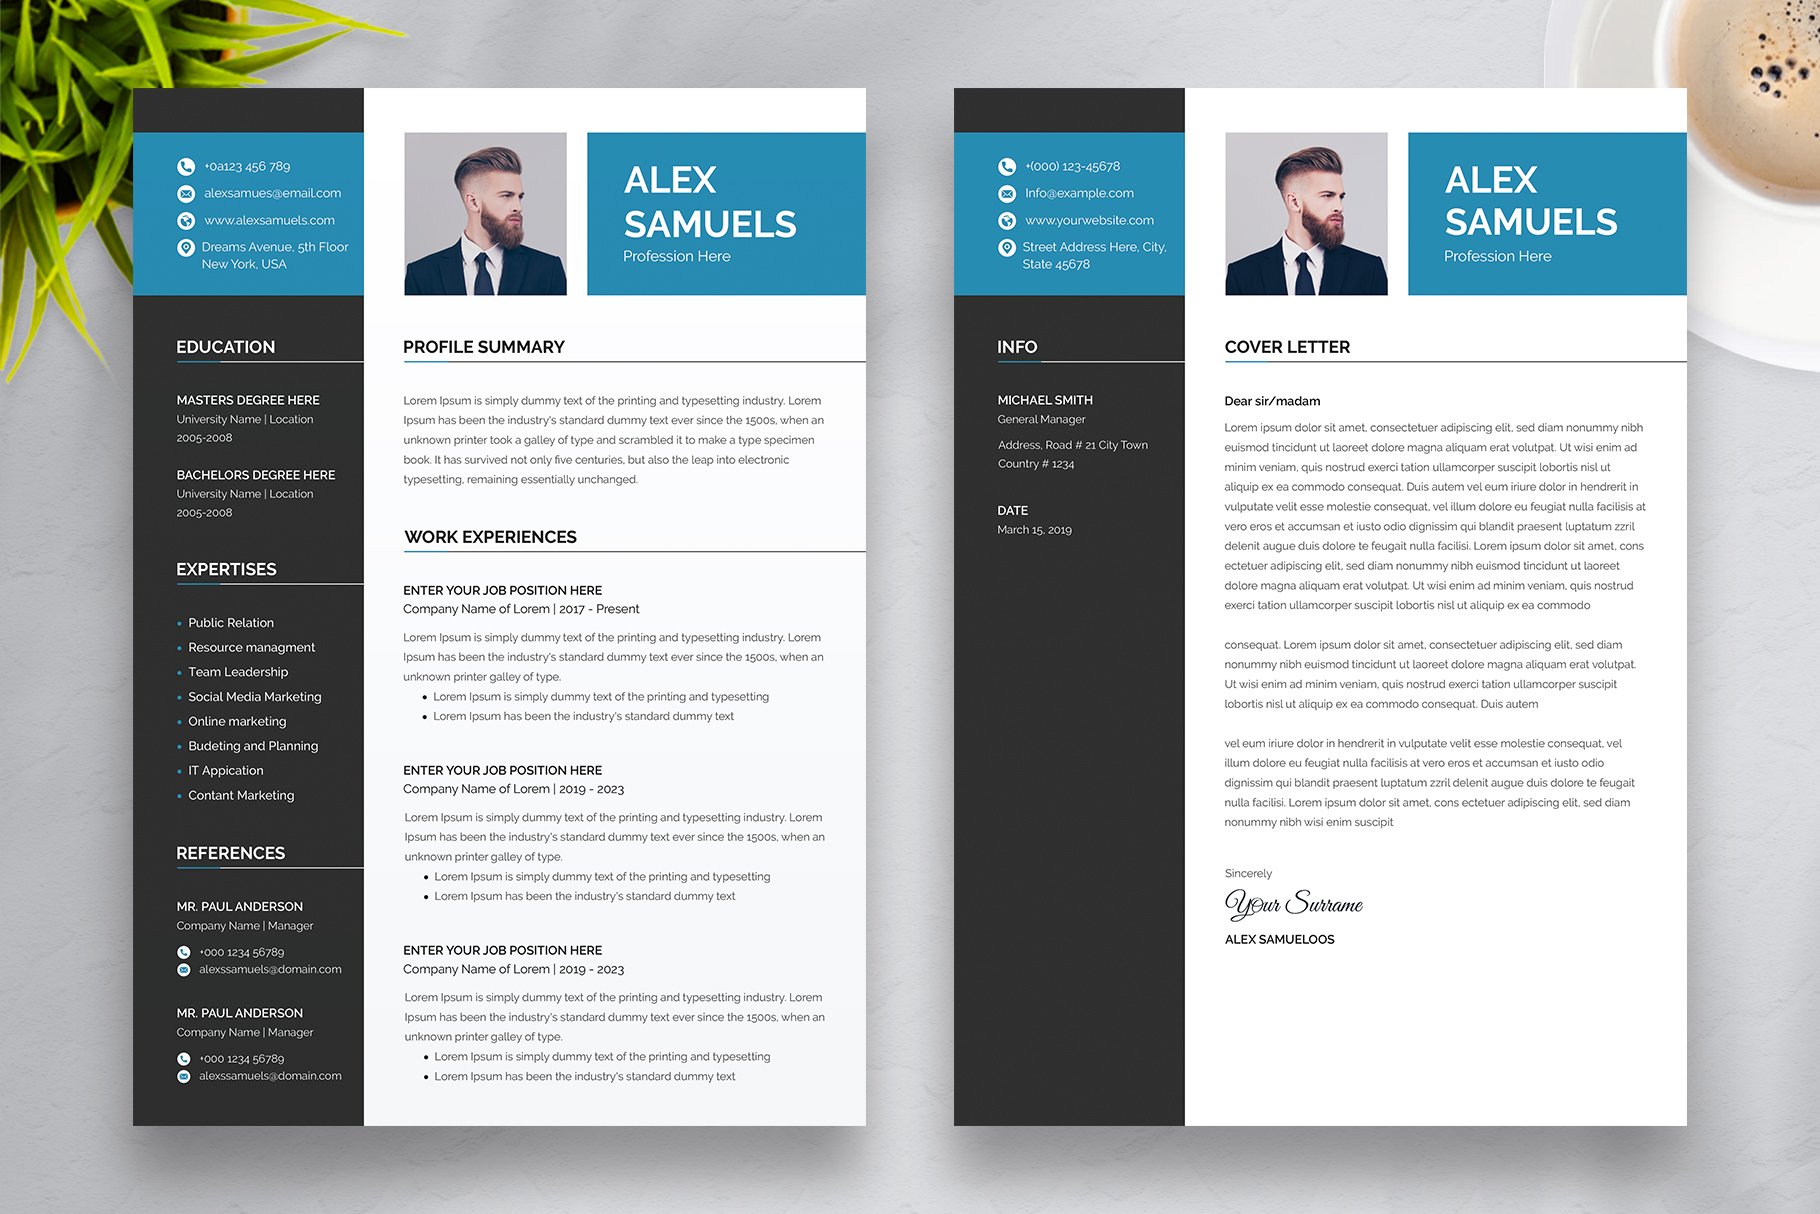 Professional Word Resume CV preview image.